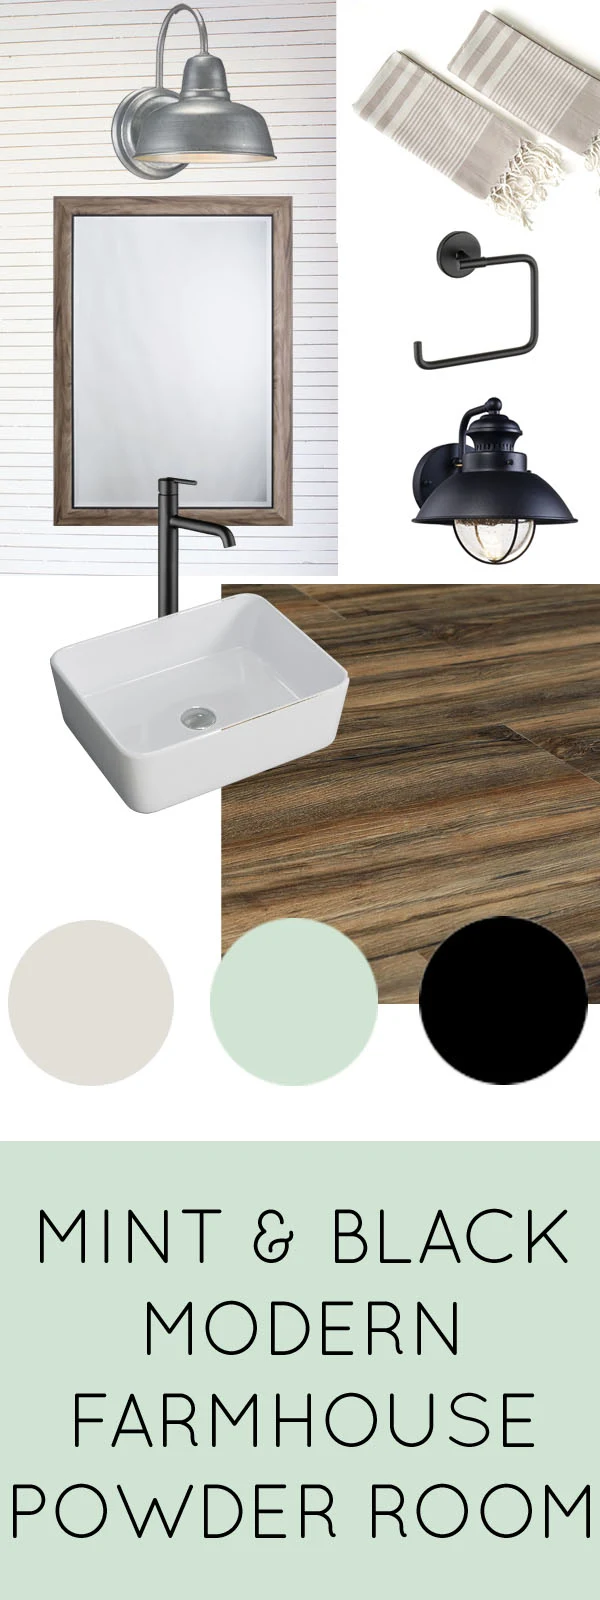 Check out these ideas for a modern farmhouse powder room with mint, black, and wood tones. Love the idea of a skinnylap backsplash!